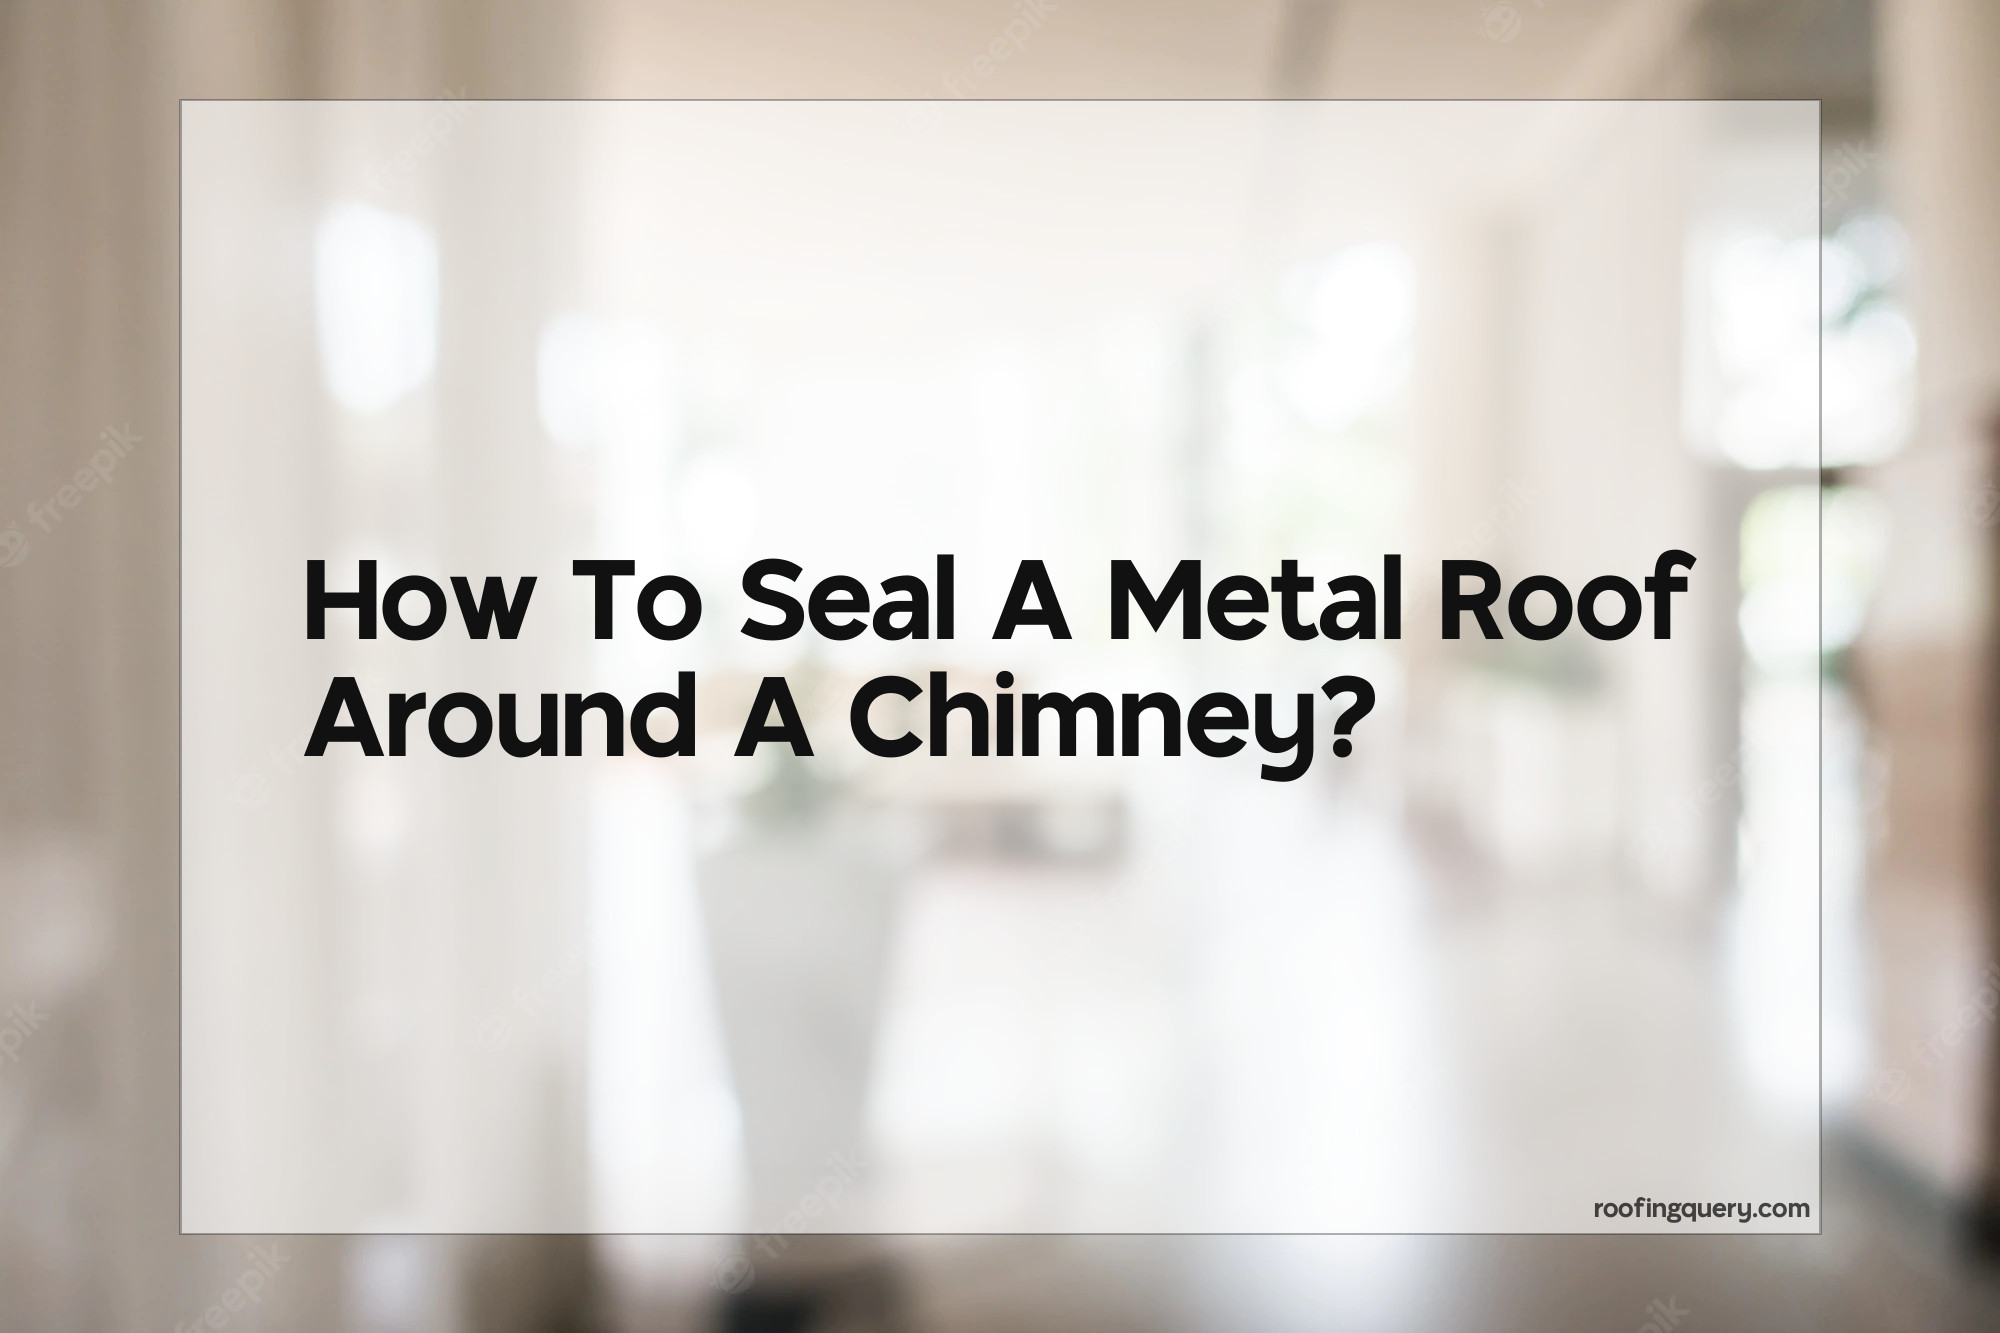 How To Seal A Metal Roof Around A Chimney